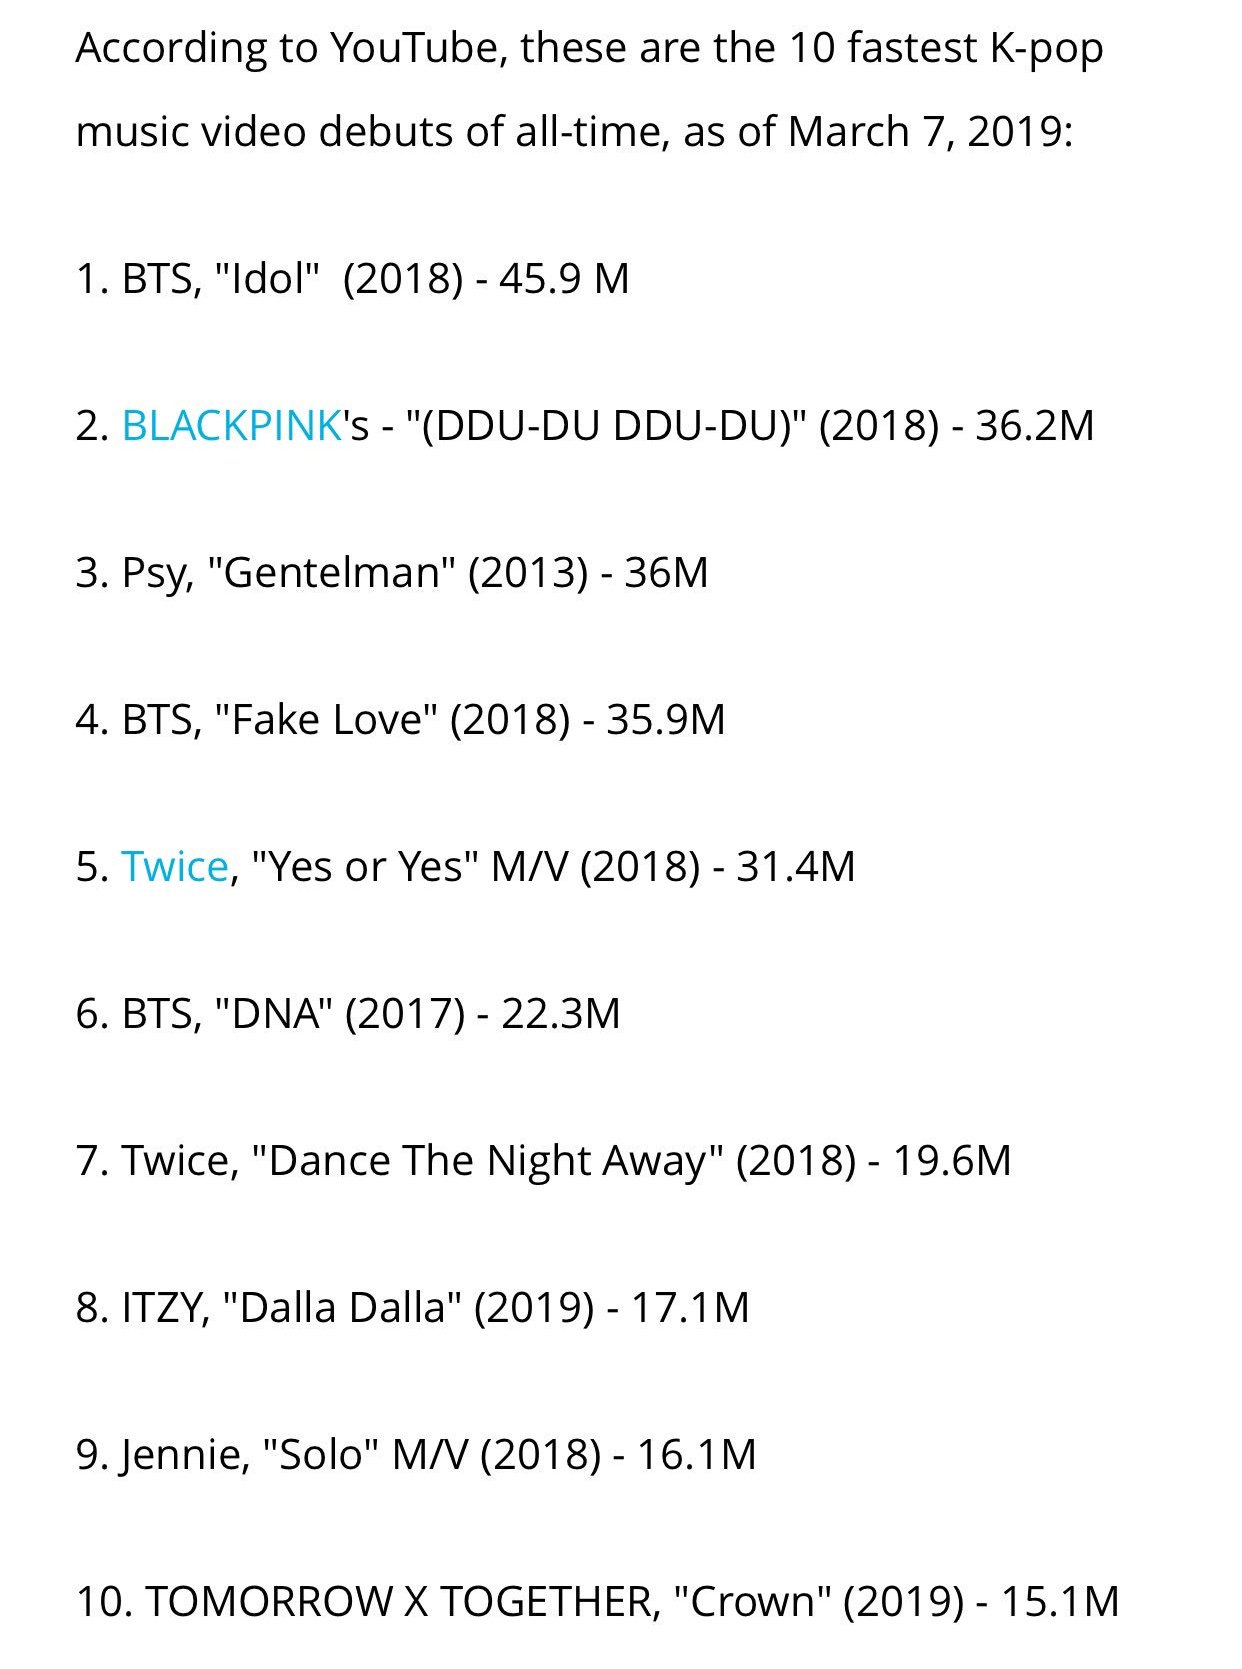 Blackpink Charts On Twitter According To This Billboard Article Jennie S Solo Music Video Received 16 1m Views In Its First 24 Hours Of Release On Youtube And Not 14 6m Https T Co Cokmve6g1u Https T Co 6fc1fyz7x2 - blackpink solo jennie roblox id of 2019